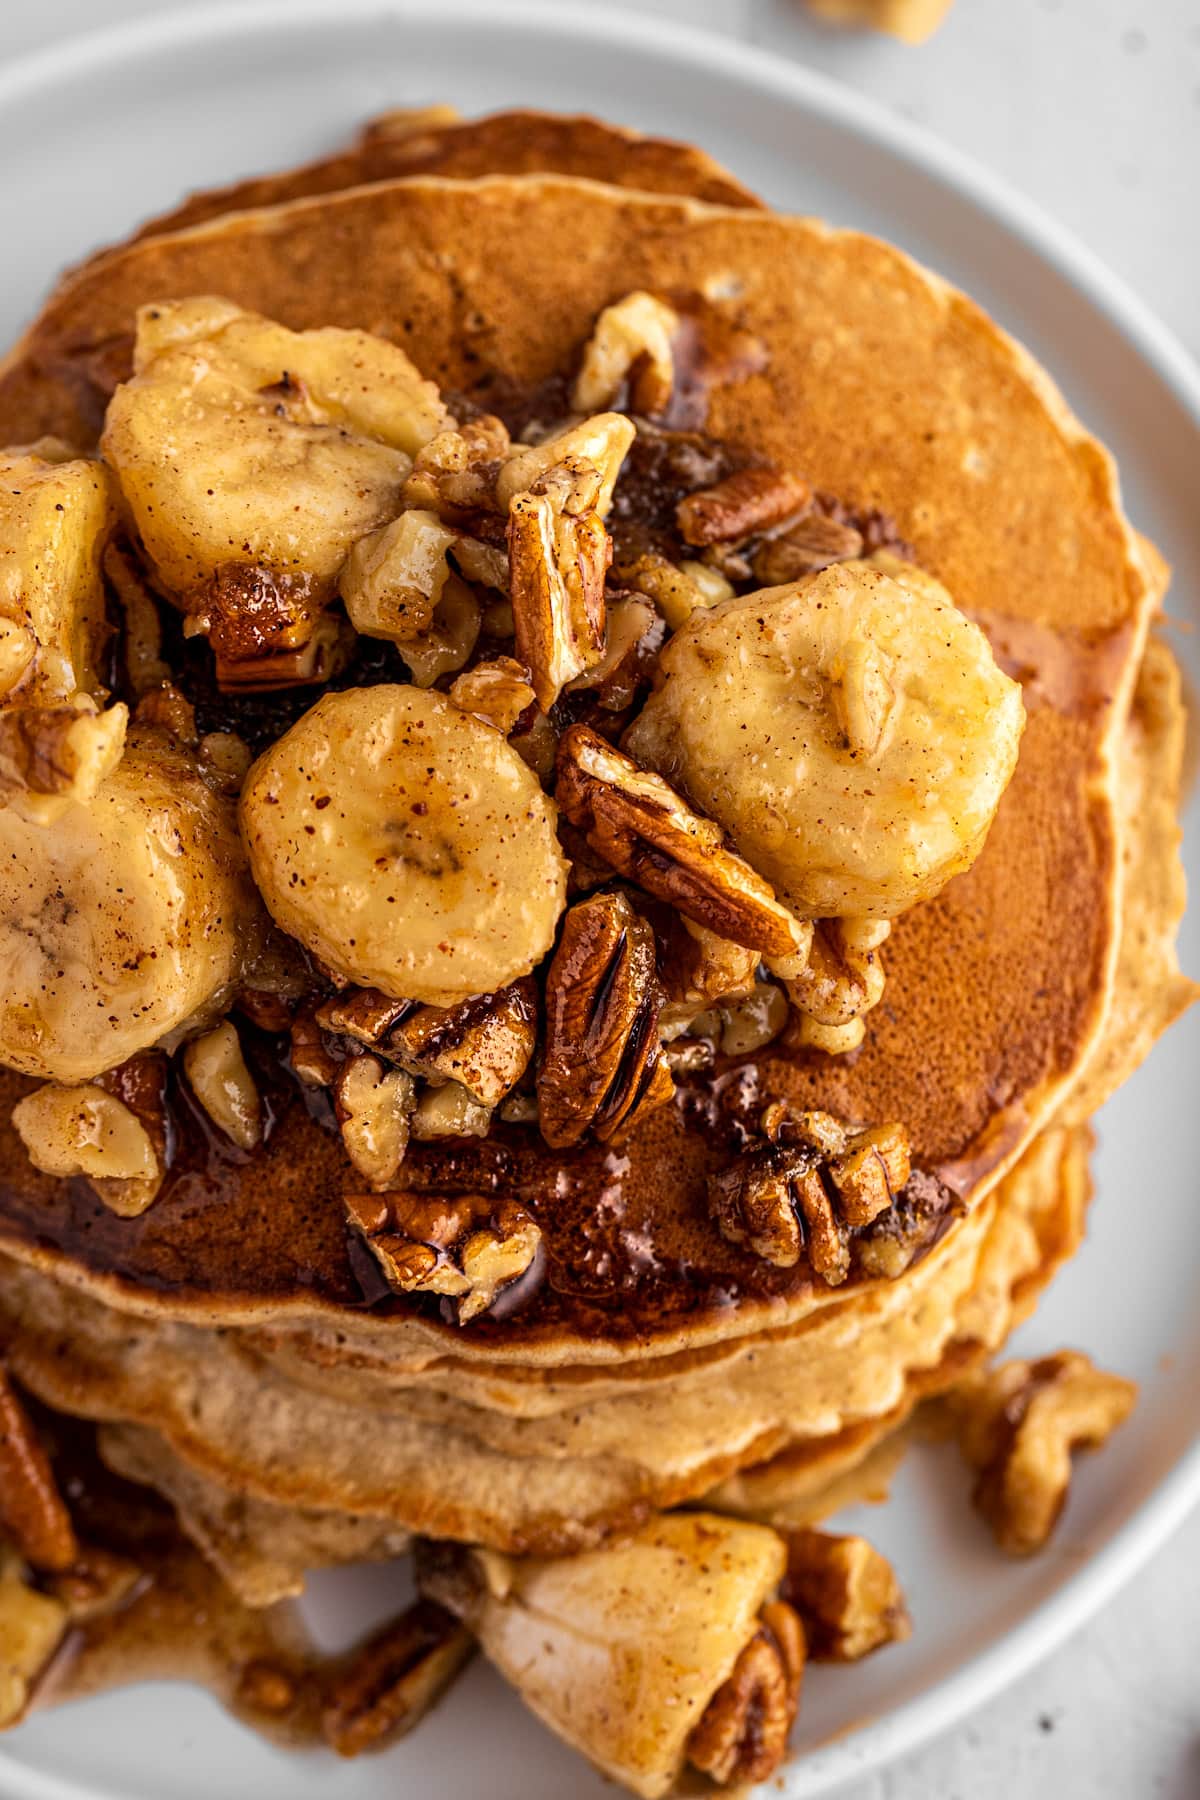 Overhead view of the bananas foster topping sauce on top of a stack of pancakes.